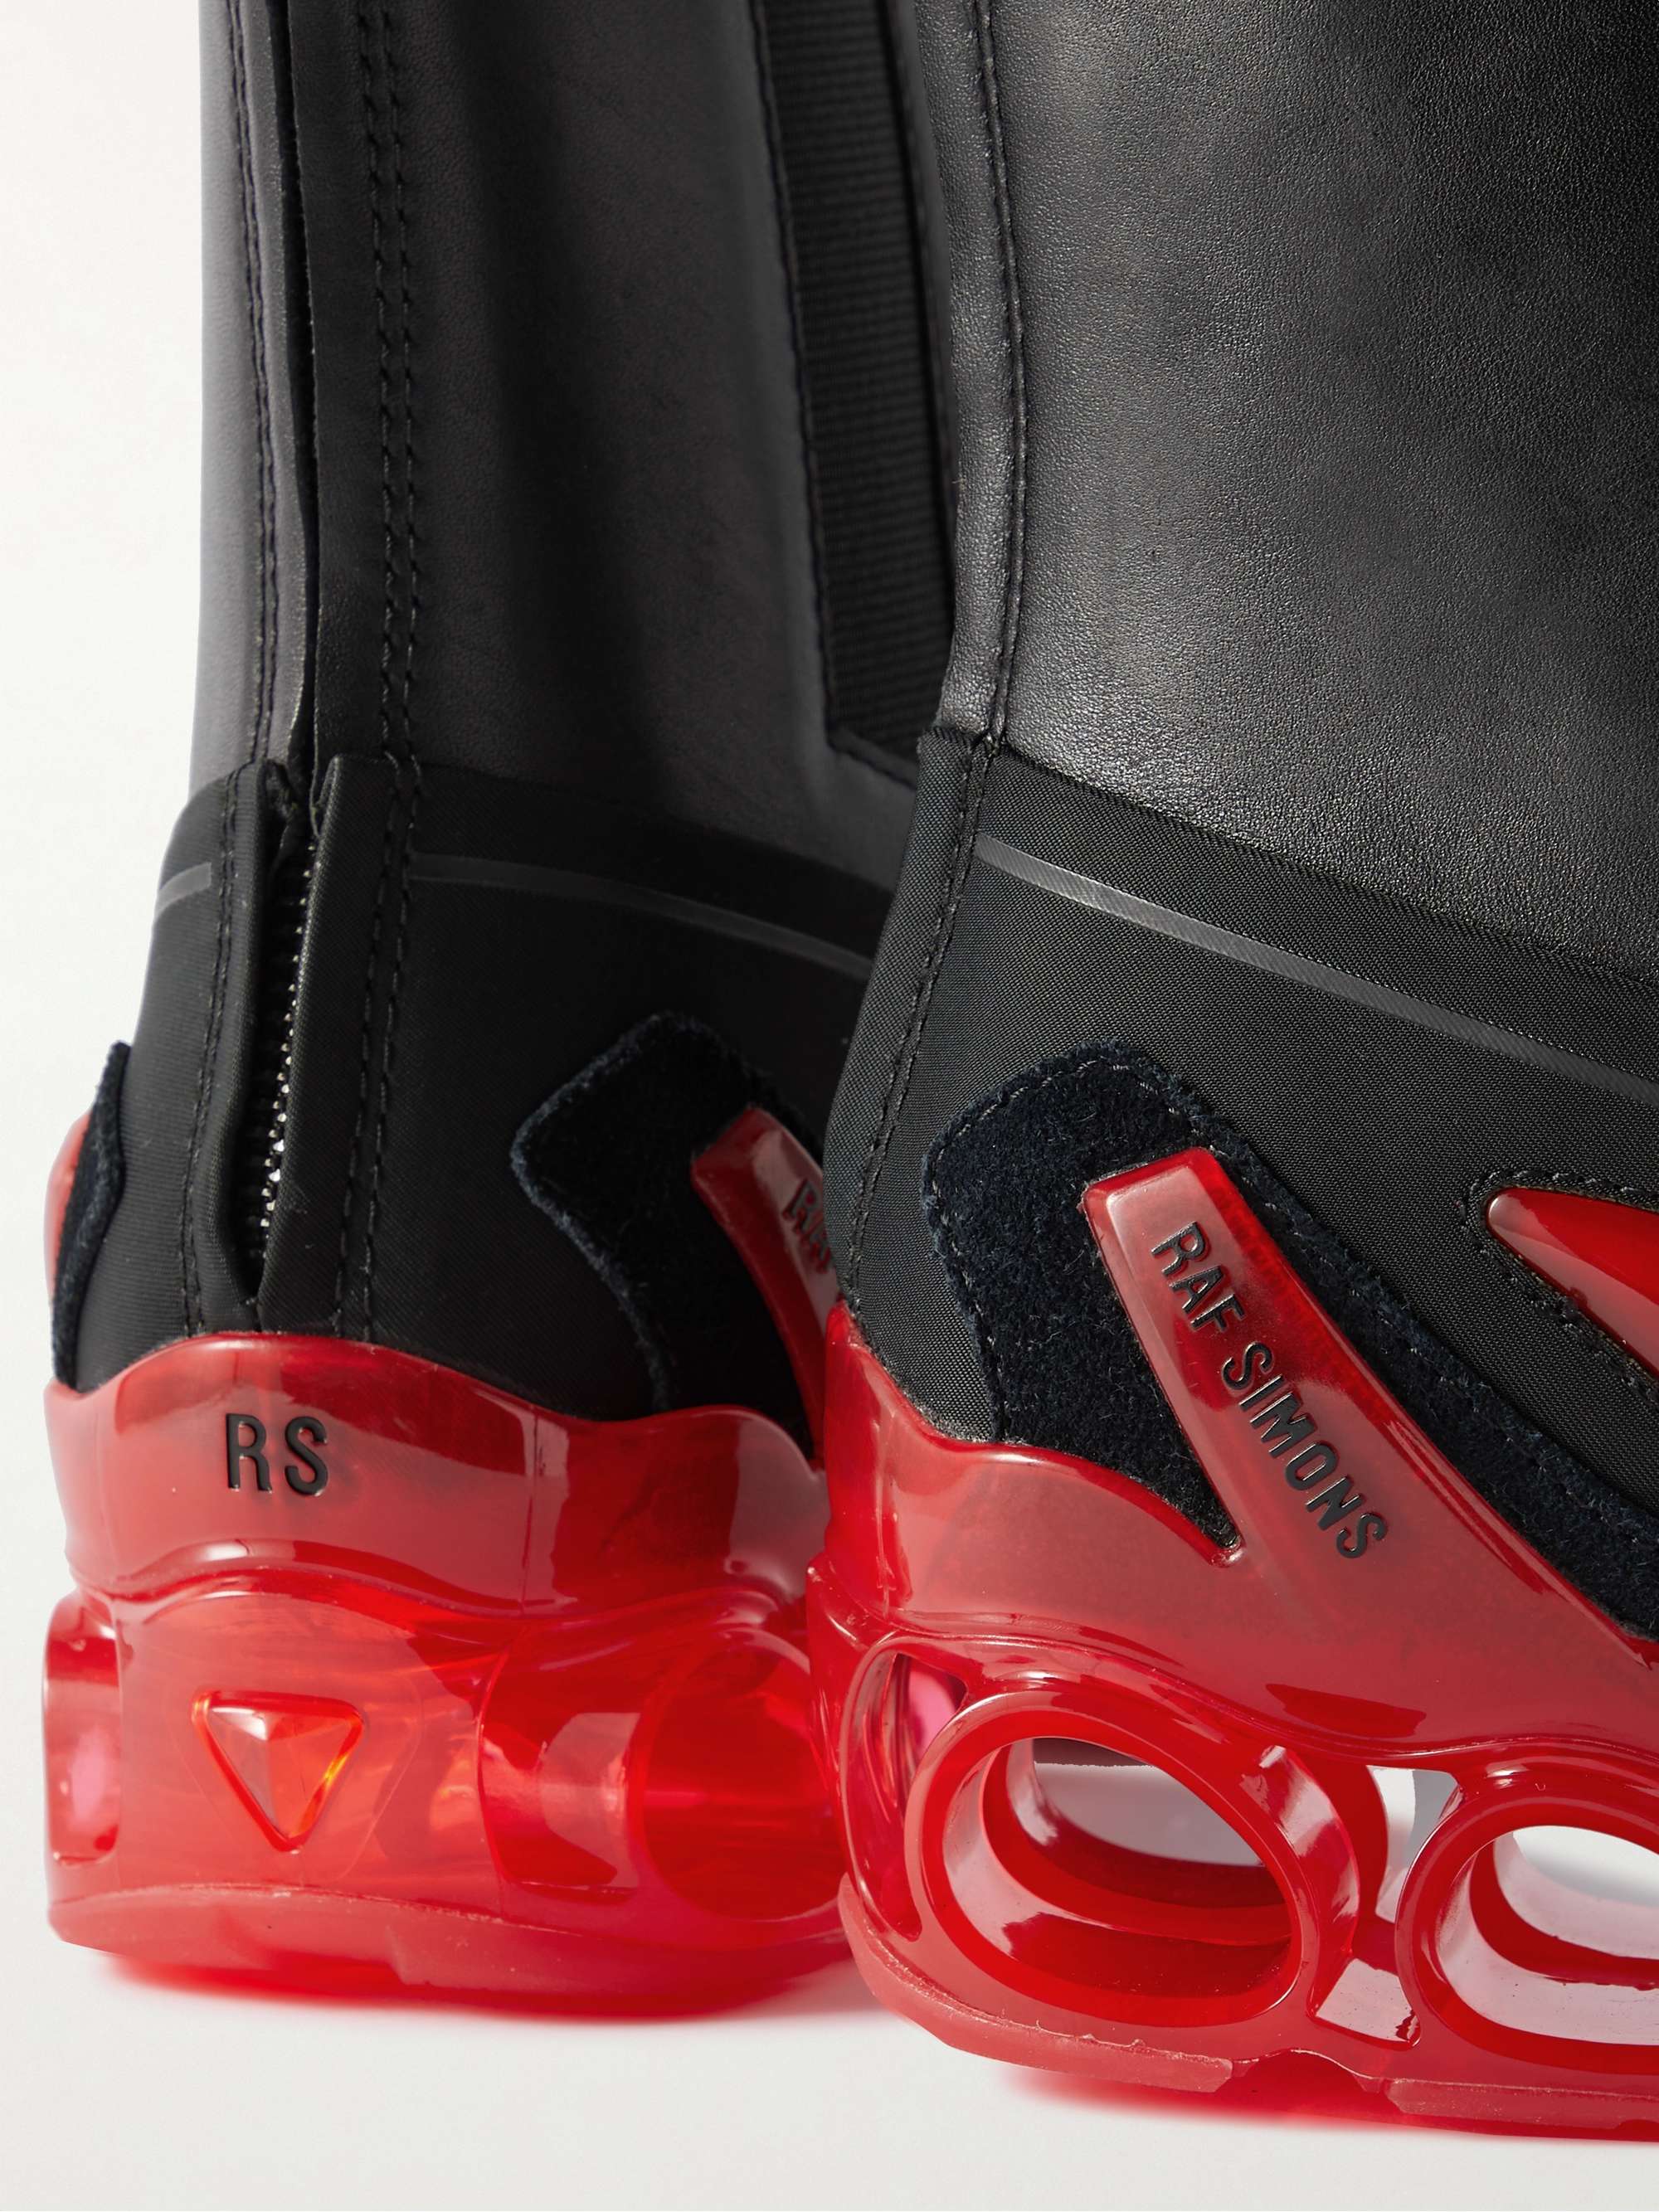 RAF SIMONS Cycloid-4 Nylon and Suede-Trimmed Leather Ankle Boots